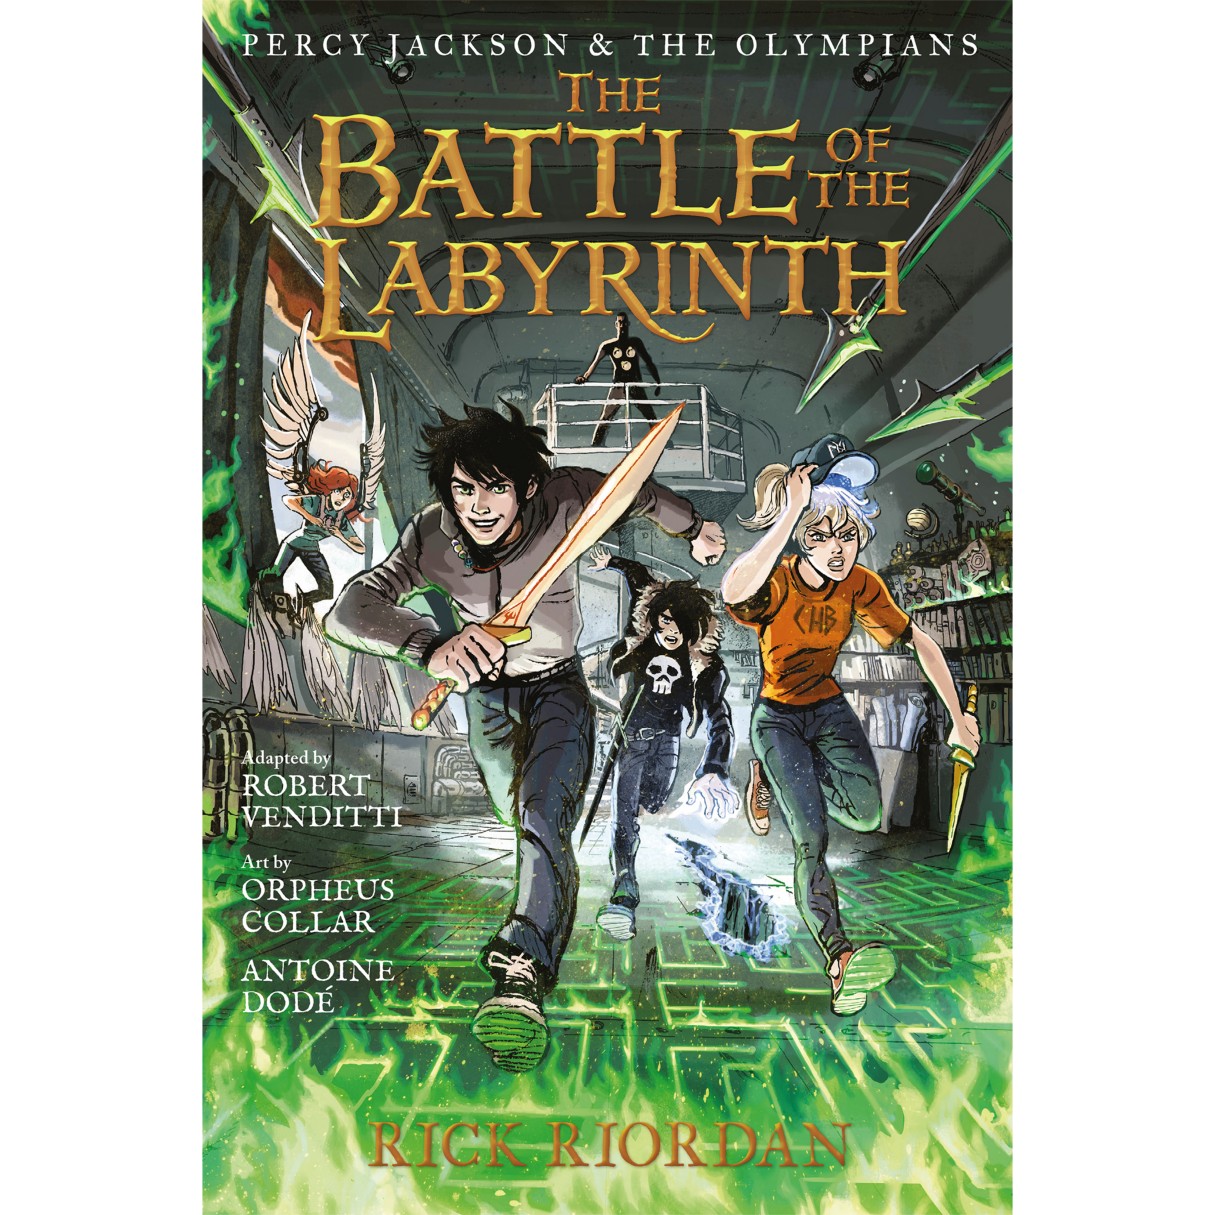 Percy Jackson and the Olympians, Book Four: The Battle of the Labyrinth – The Graphic Novel